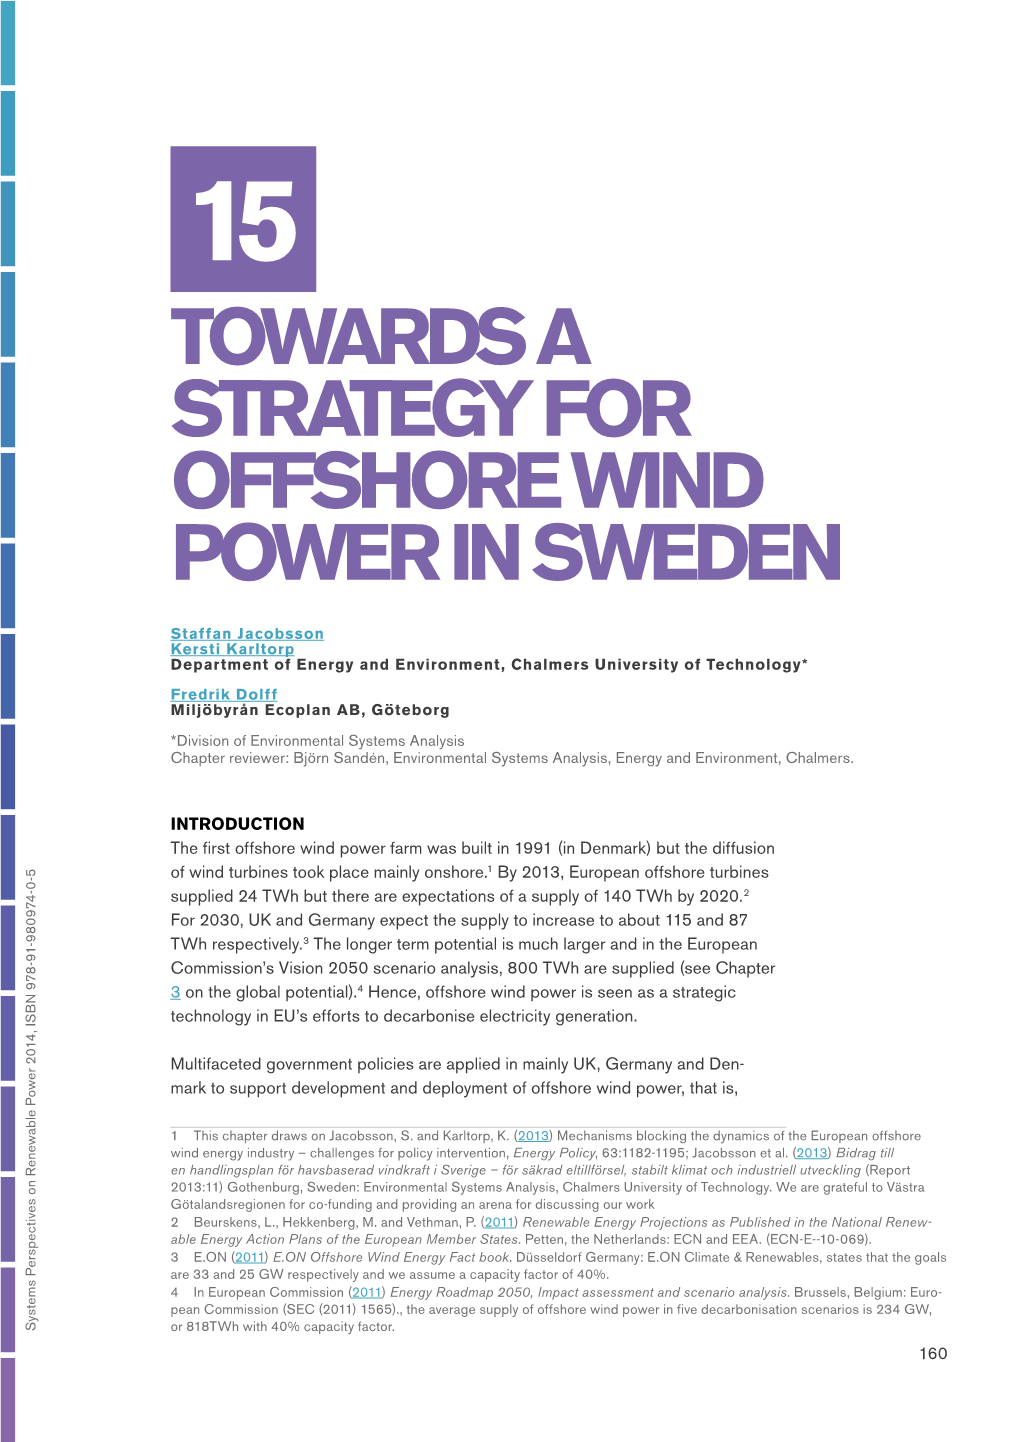 Towards a Strategy for Offshore Wind Power in Sweden